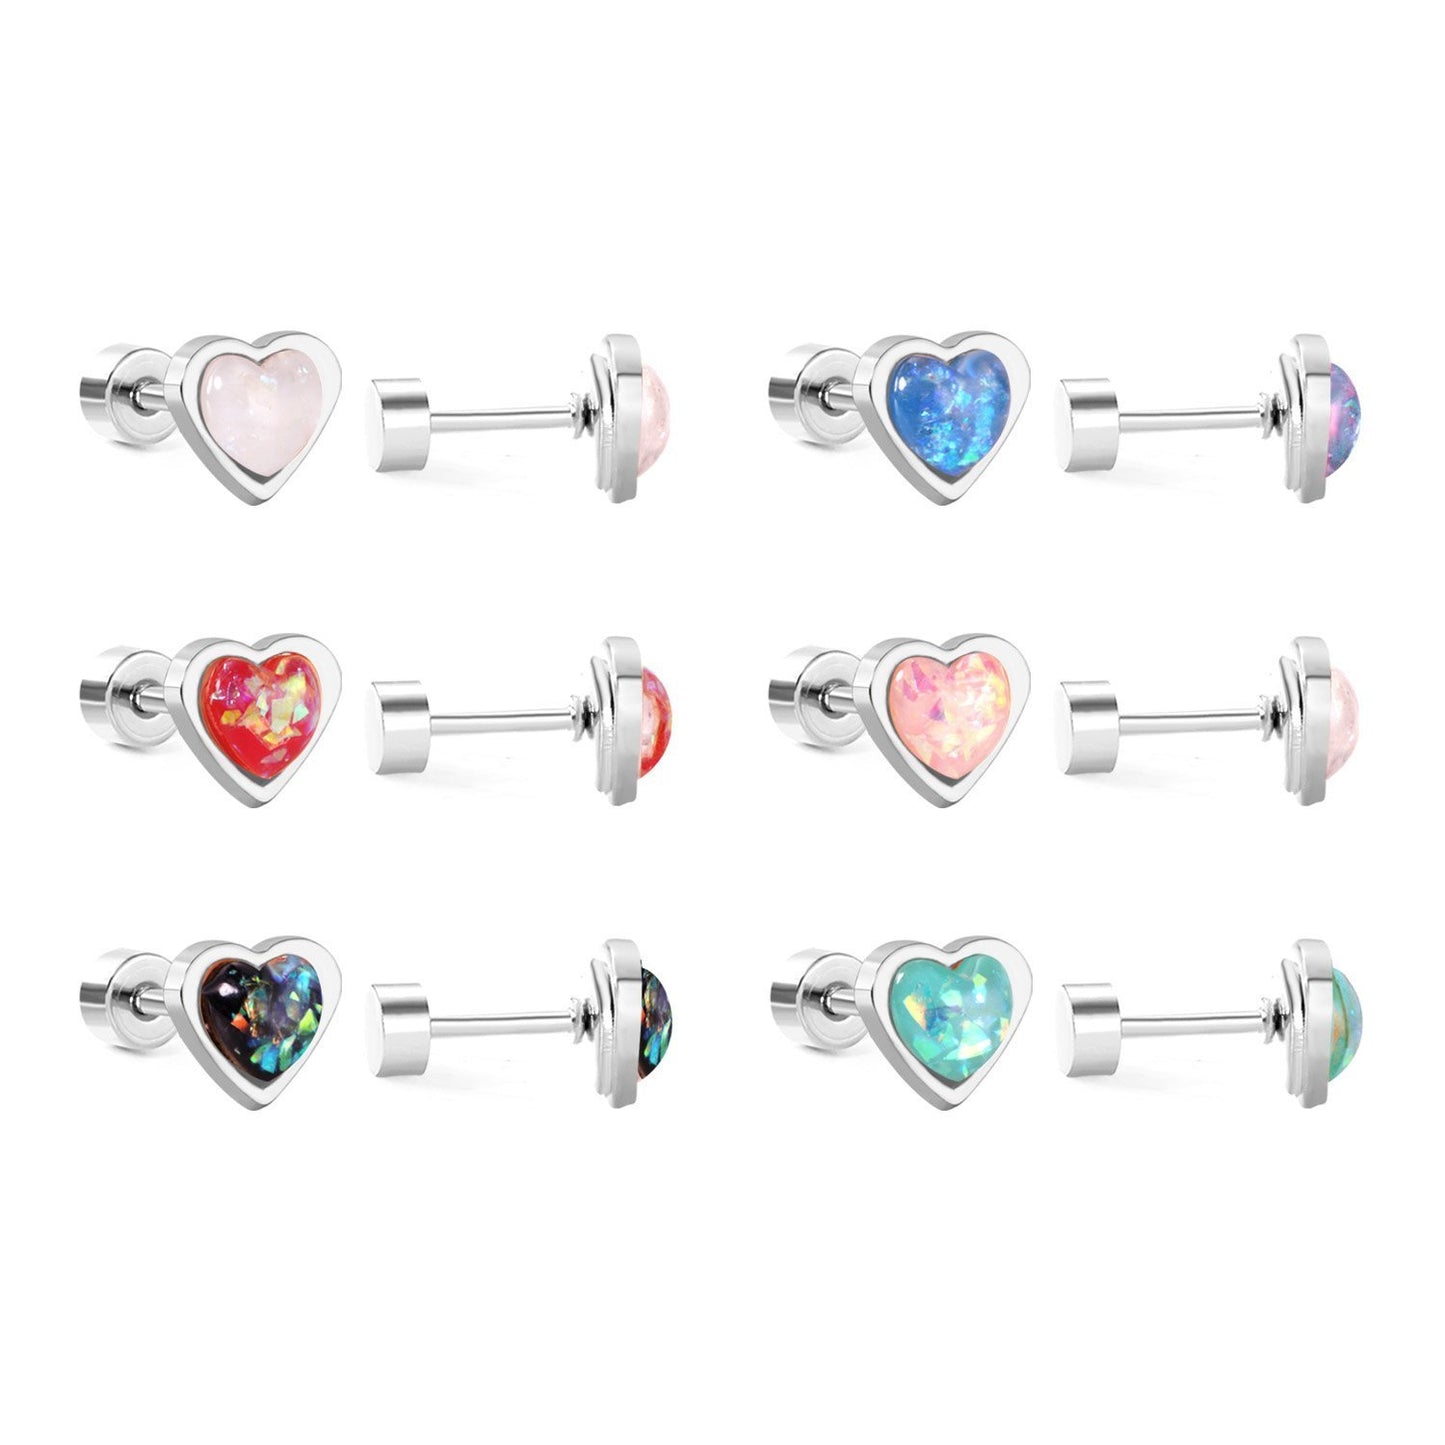 Children's, Teens' and Mothers' Earrings:  Surgical Steel, Sparkly Enamel Heart Earrings with Screw Backs - Aqua